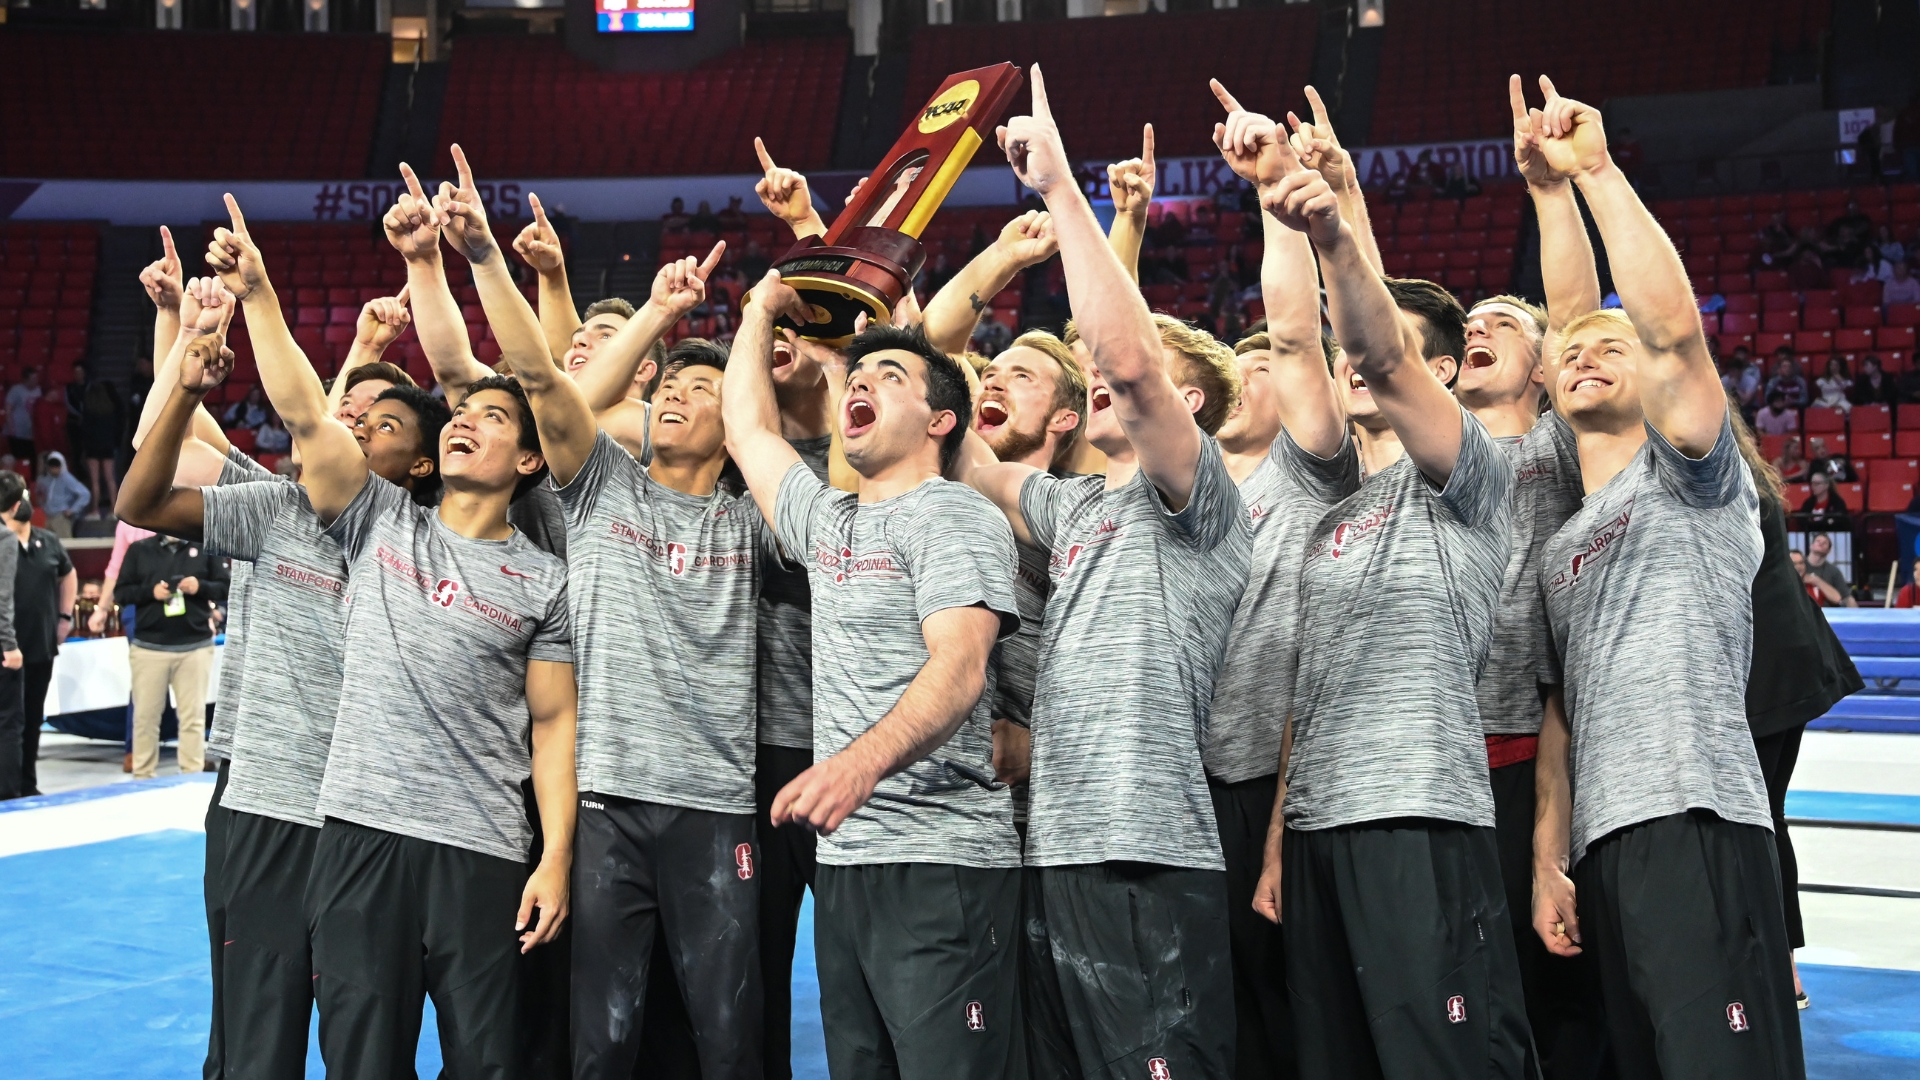 2023 NCAA Men’s Gymnastics & GymACT preview Stanford looks to fend off